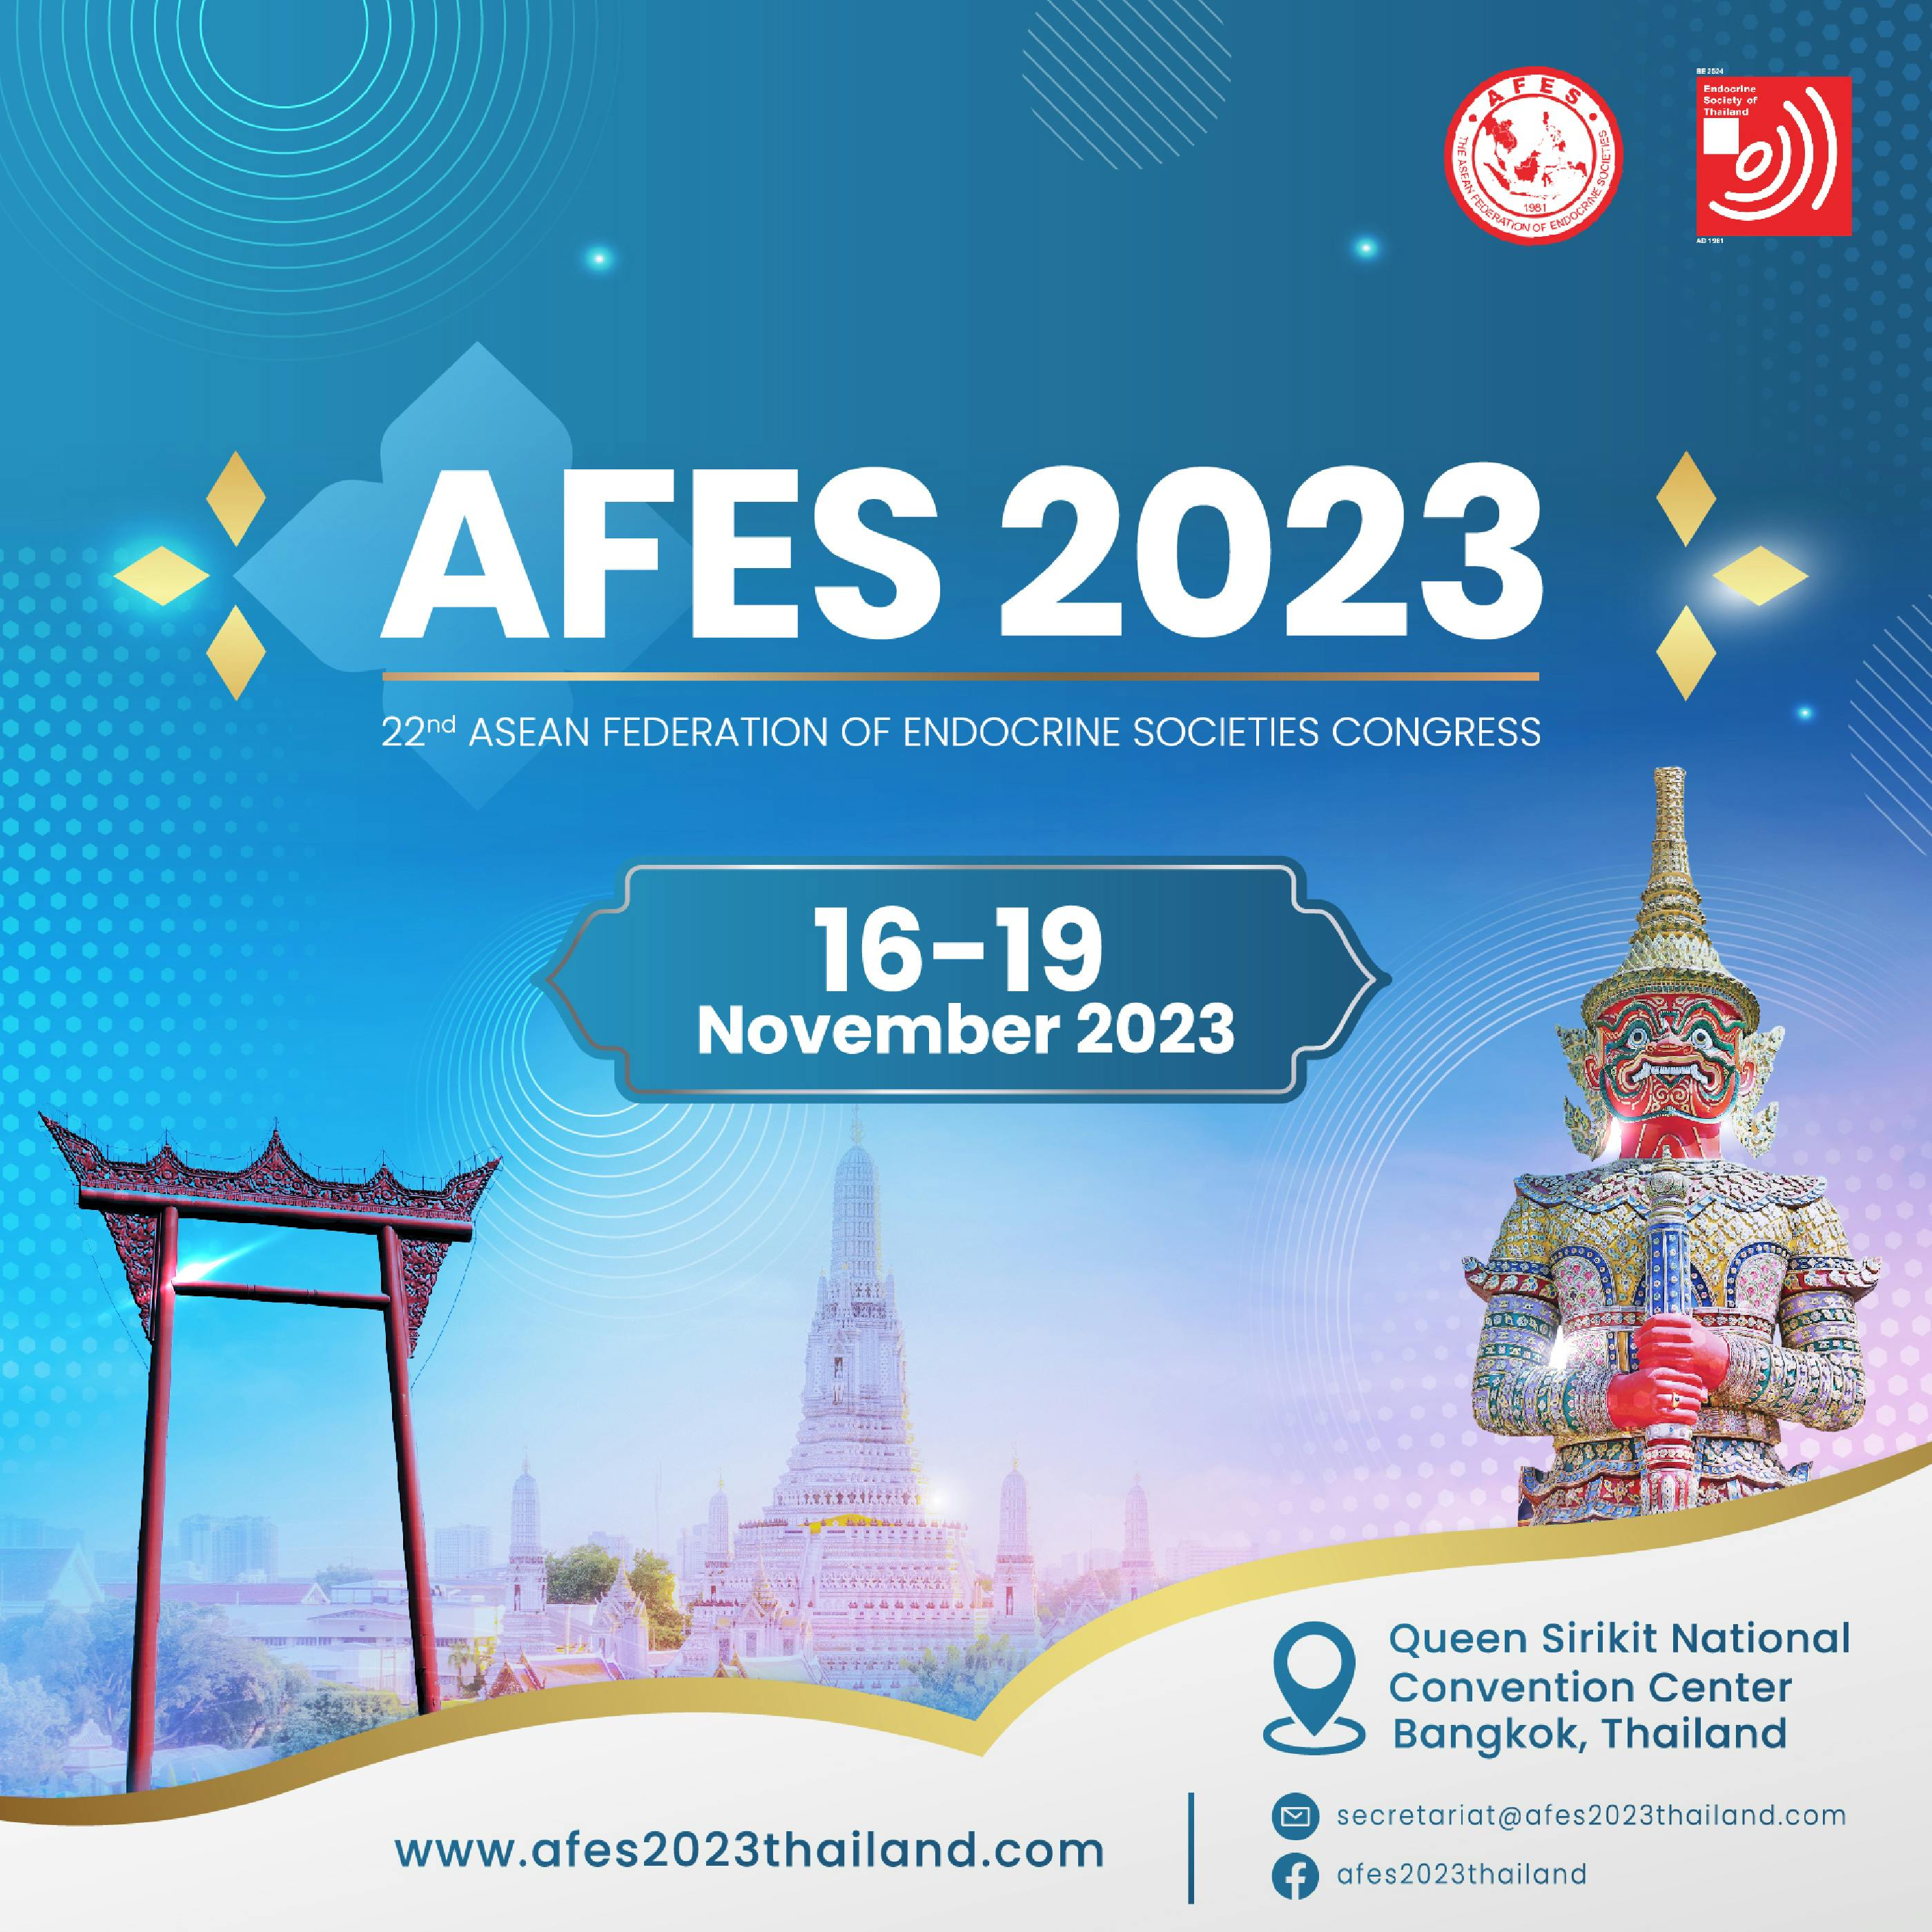 The 22nd ASEAN Federation of Endocrine Societies Congress